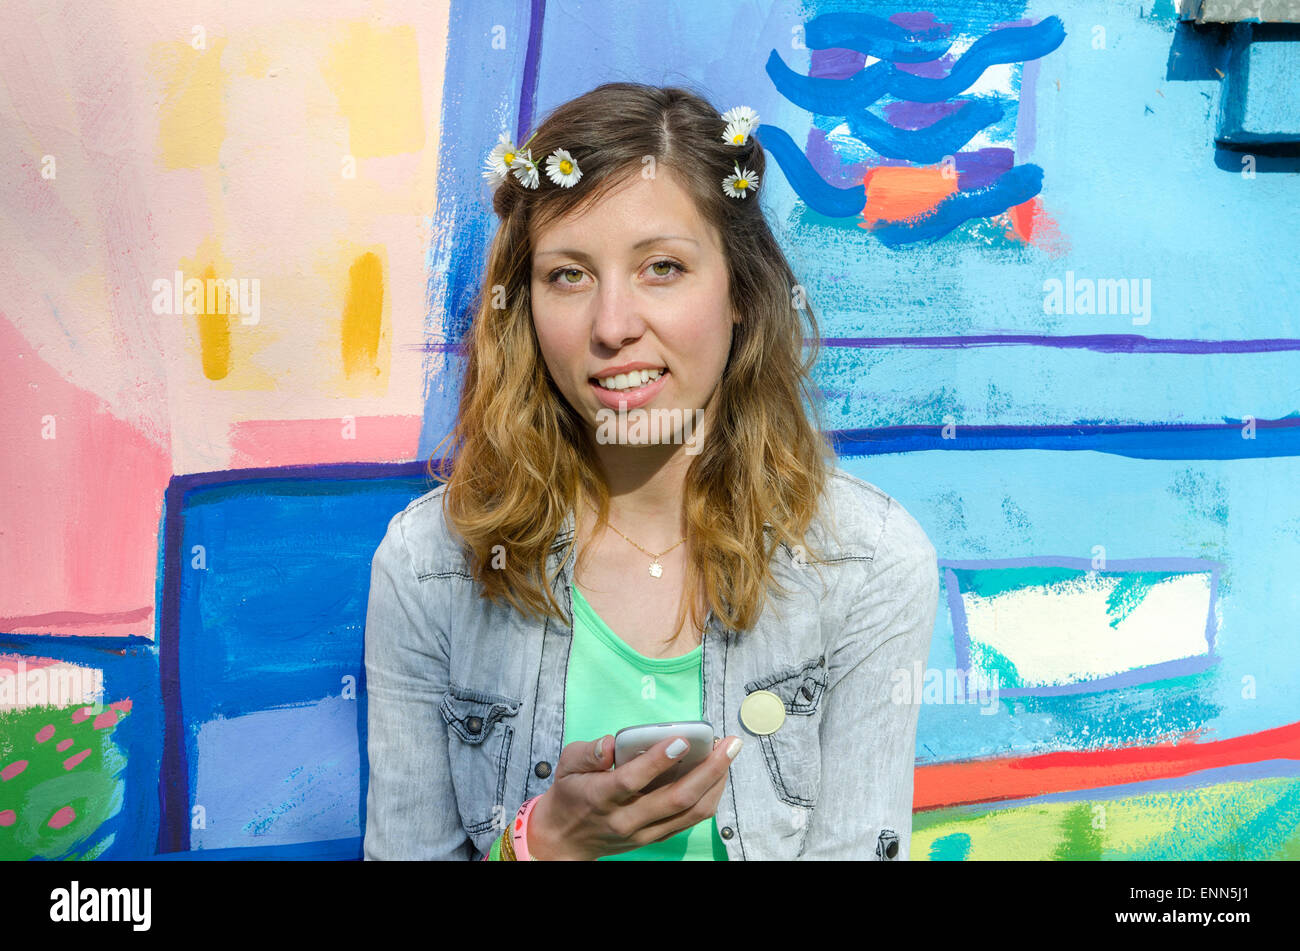 Young posing against a colorful backdrop holding smart phone Stock Photo